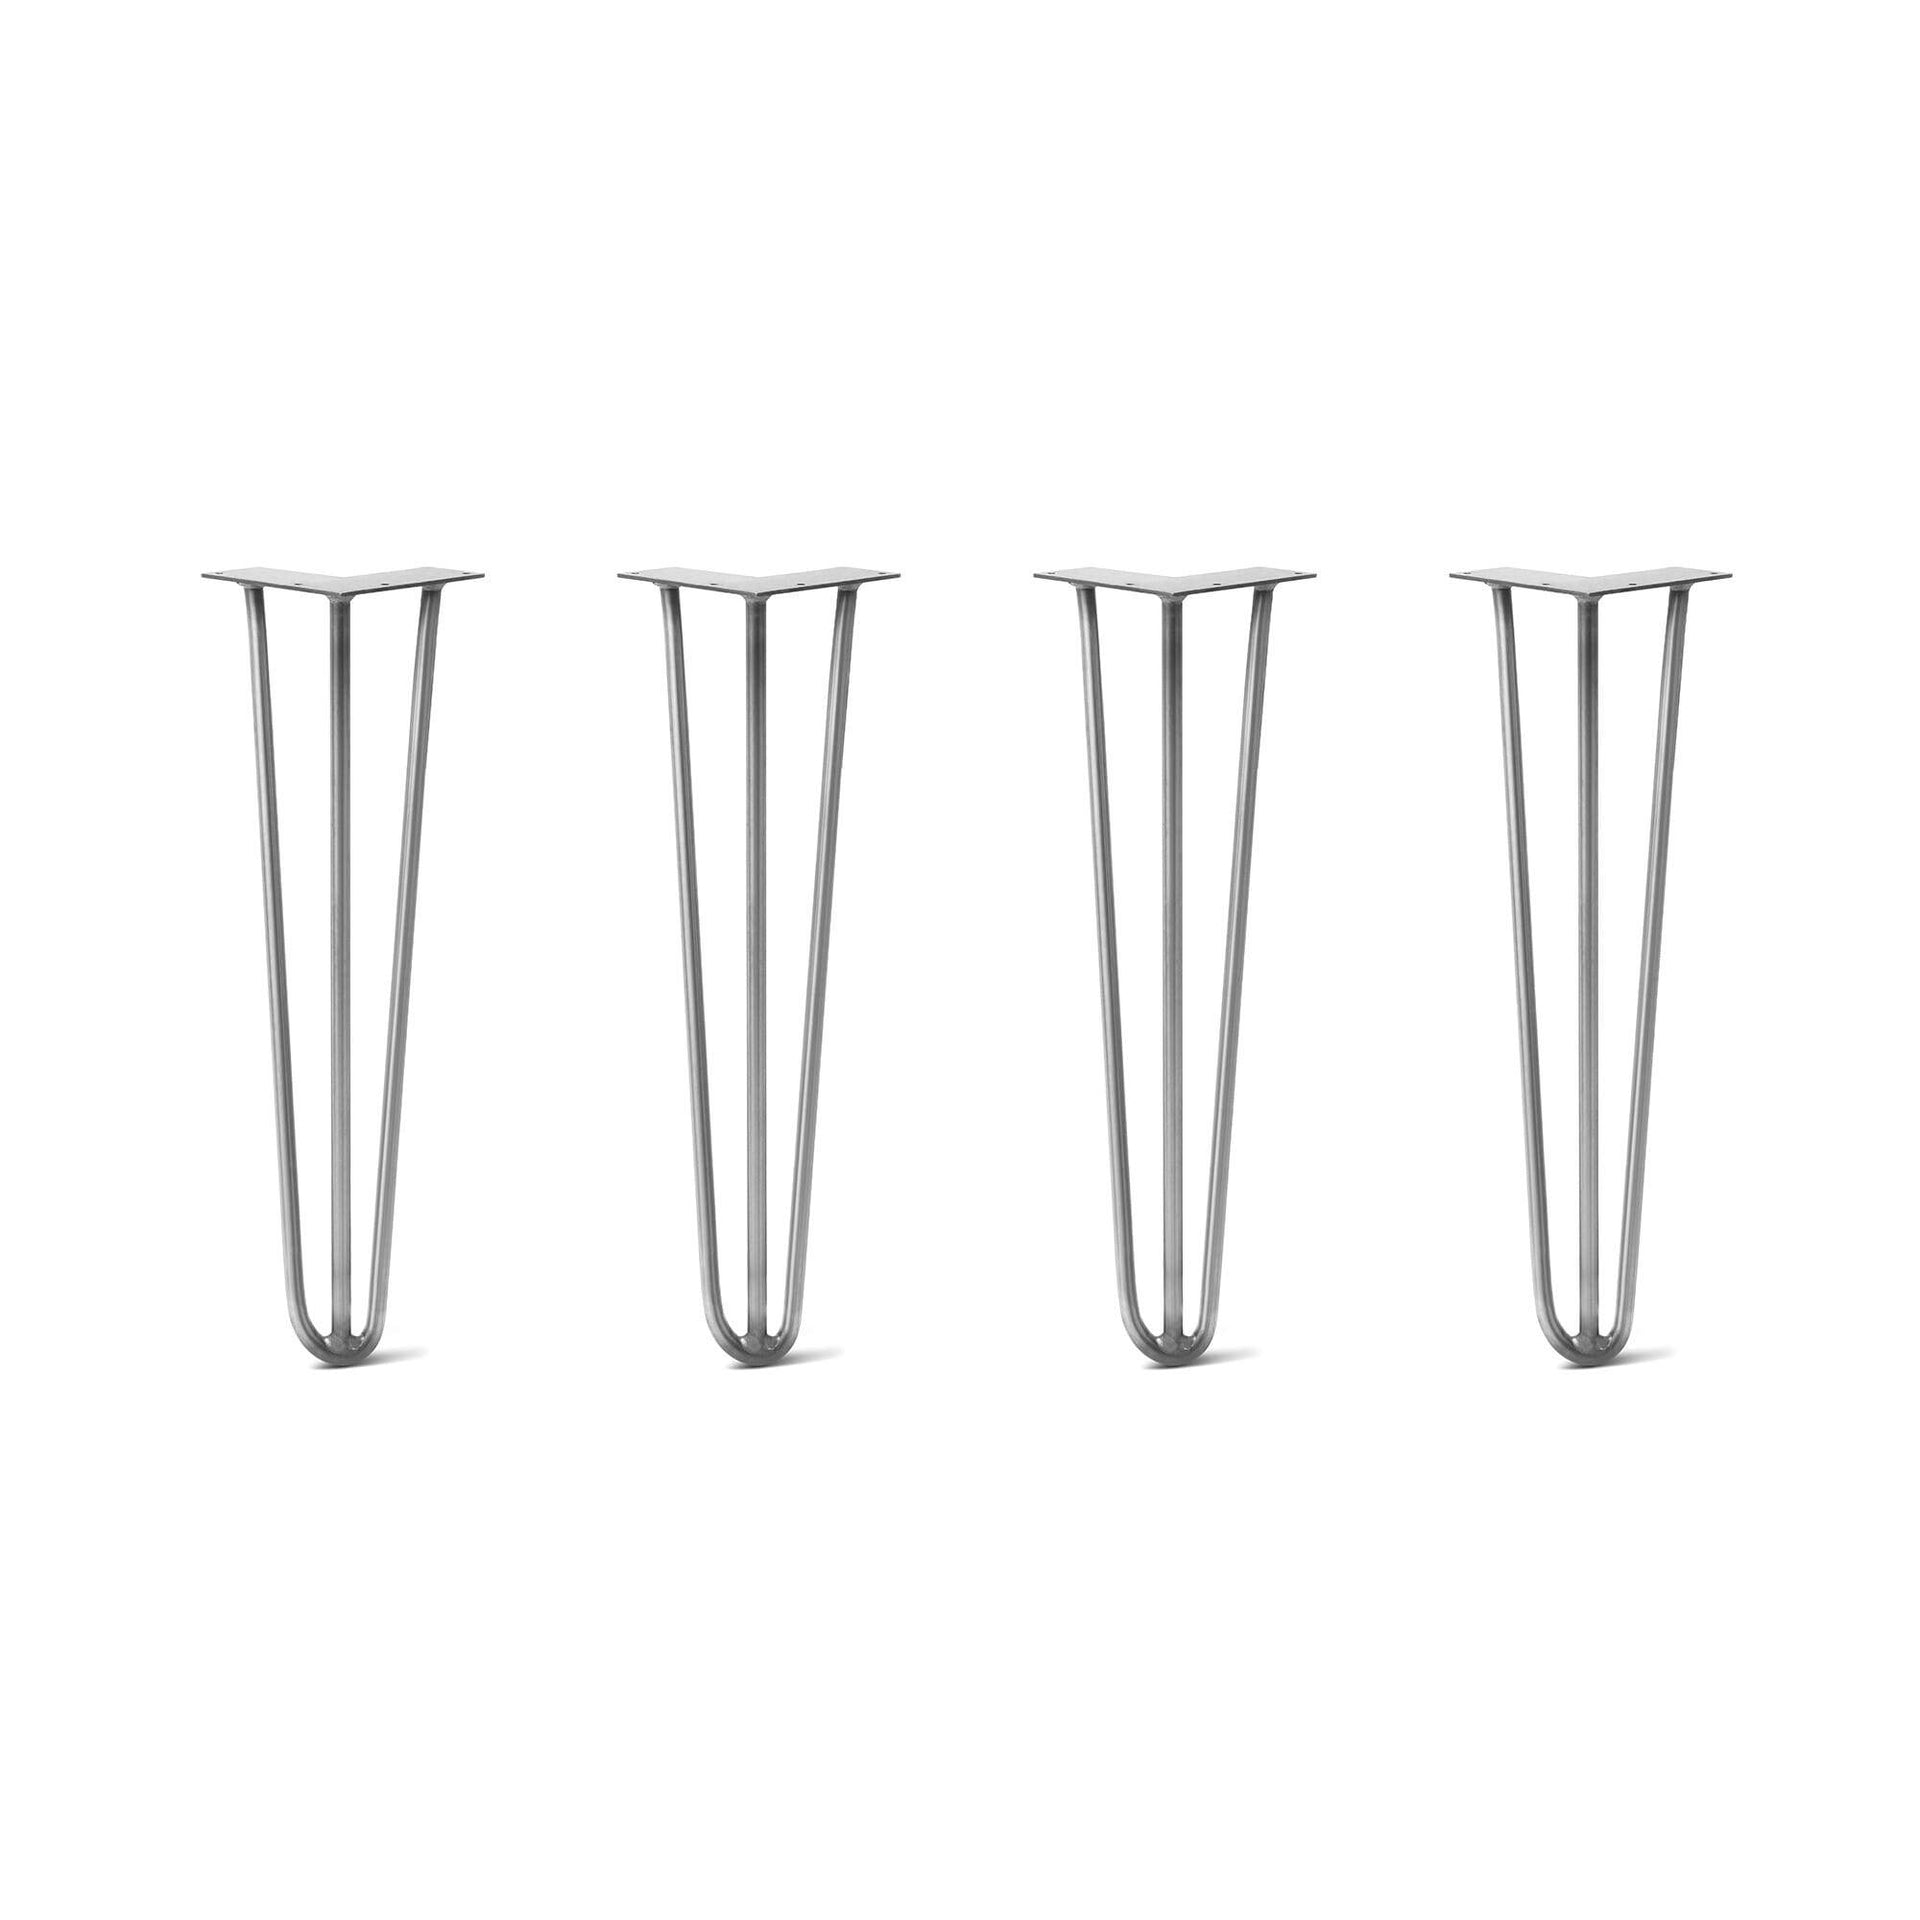 DIY Hairpin Legs - Hairpin Legs Set of 4 - Sizes 4" to 40" Available - Raw Steel & Powder Coated - 3/8" or 1/2" Diameter